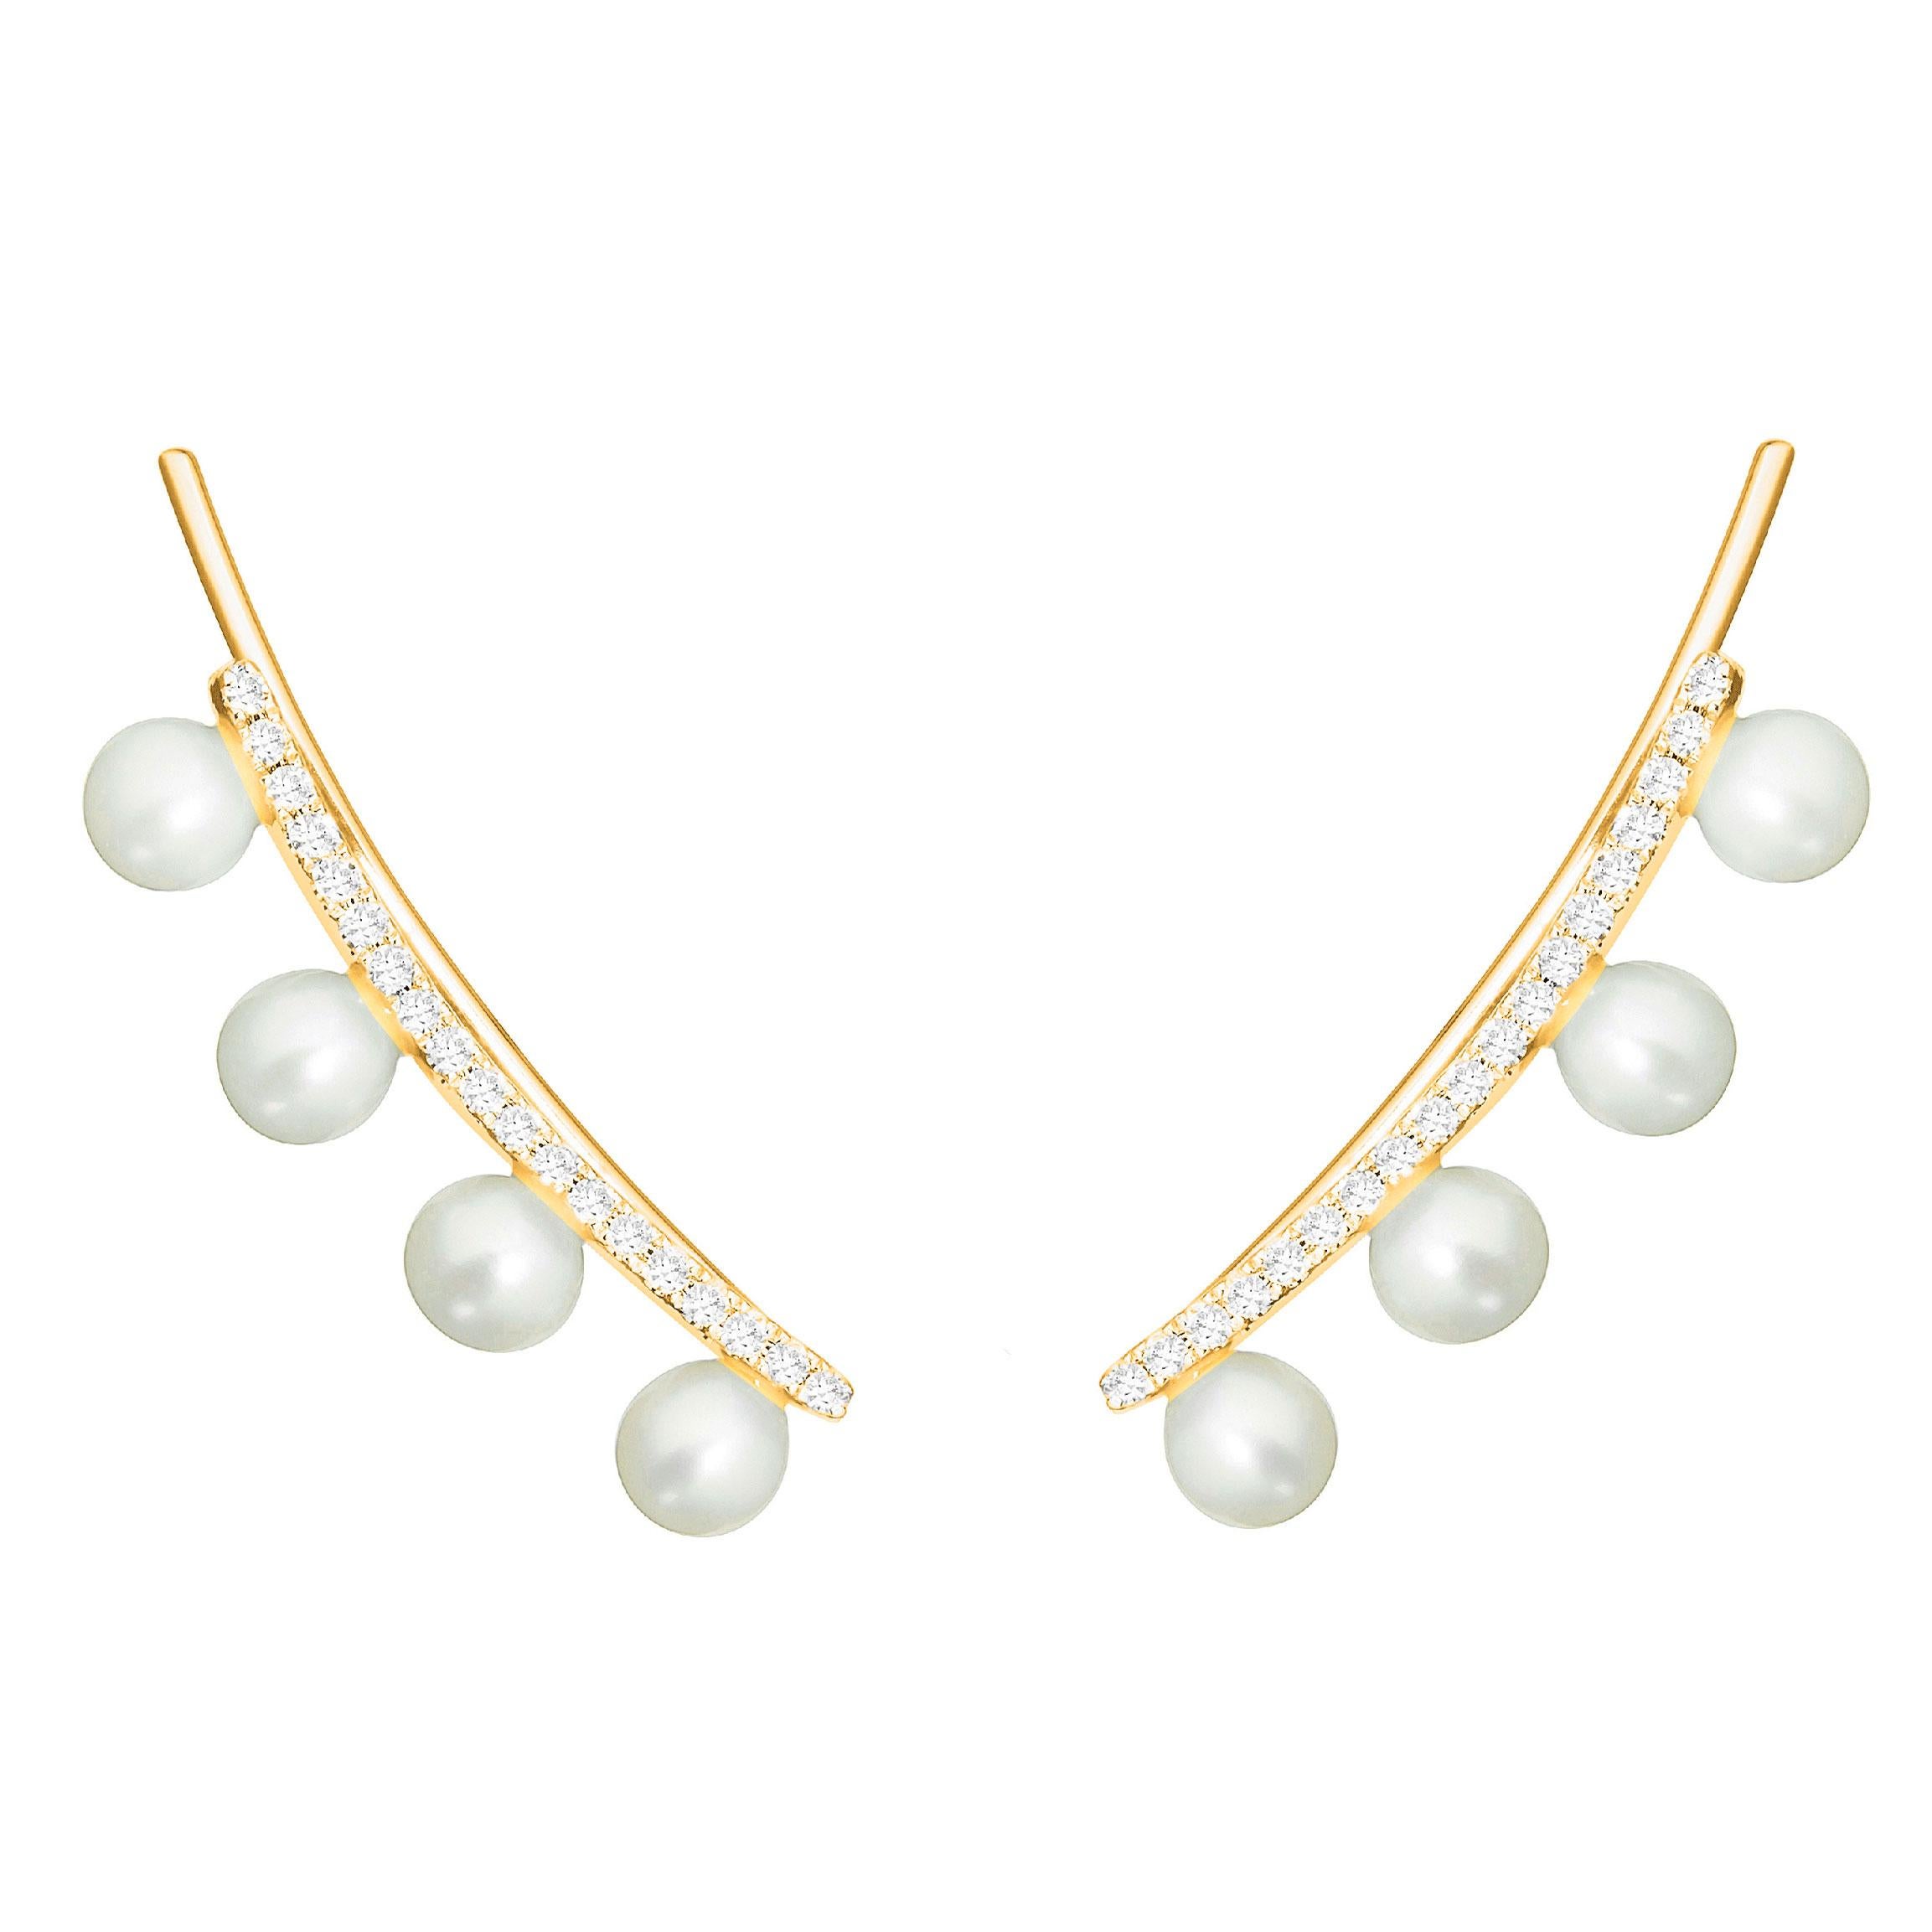 Women's or Men's 14 Karat White Gold 0.115 Carat Pearl and Round Diamond Climbing Earrings For Sale